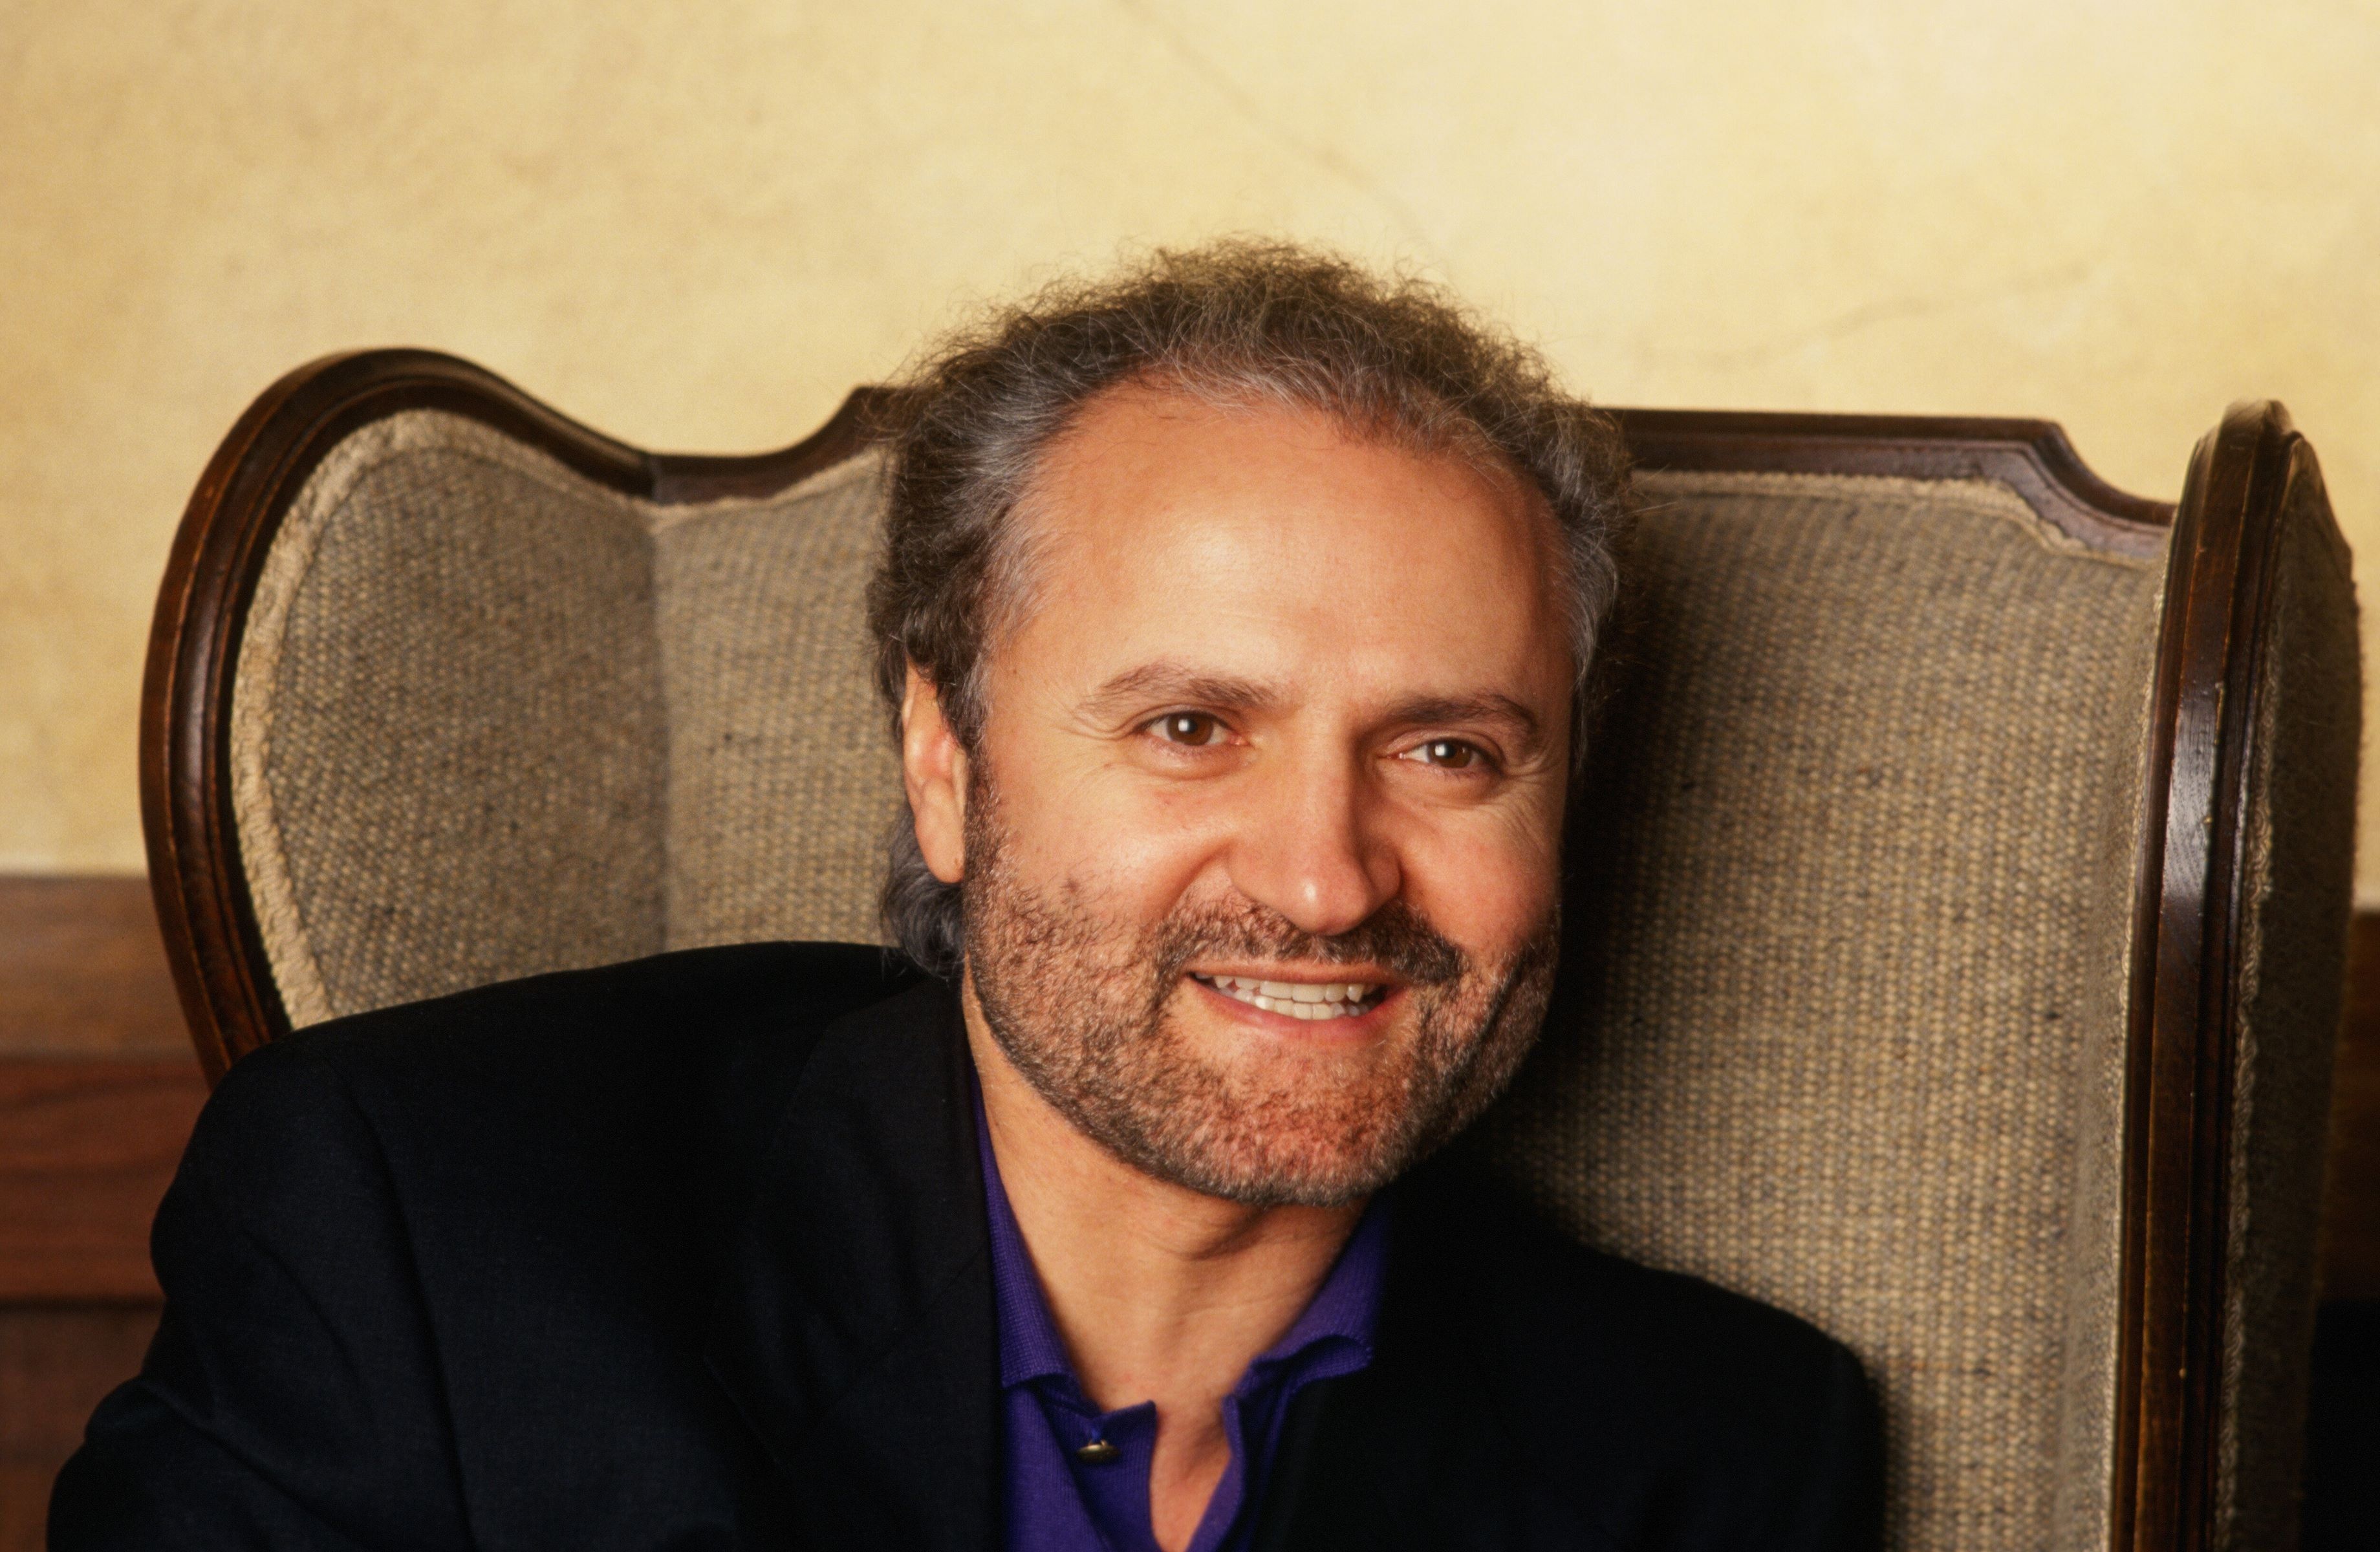 Gianni Versace  Biography, Fashion Designs, Death, & Facts